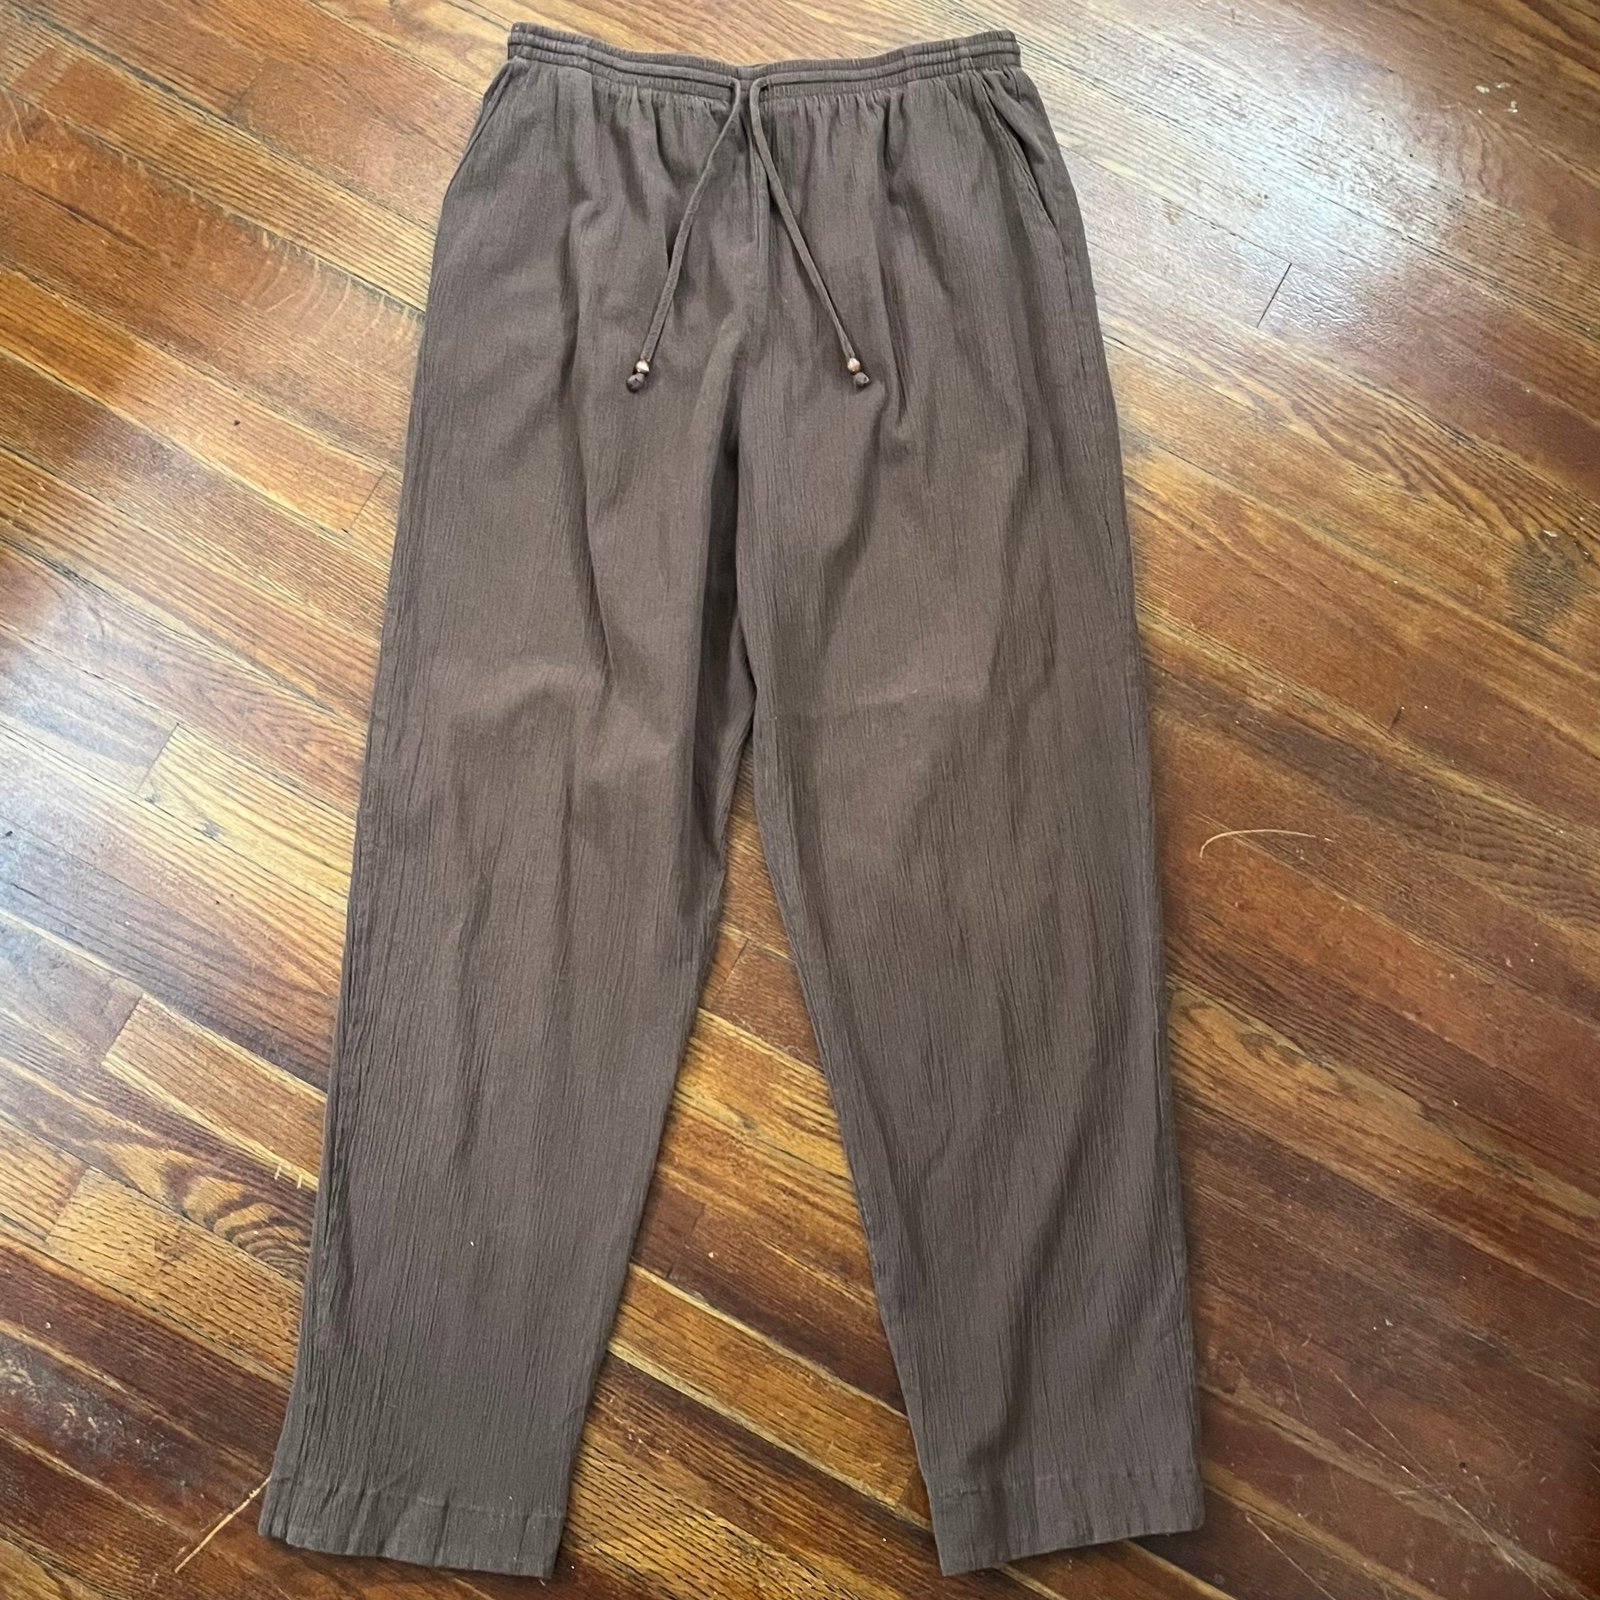 Stylish Alfred Dunner Brown Pants Size 16 N7VrdXQHY Onl